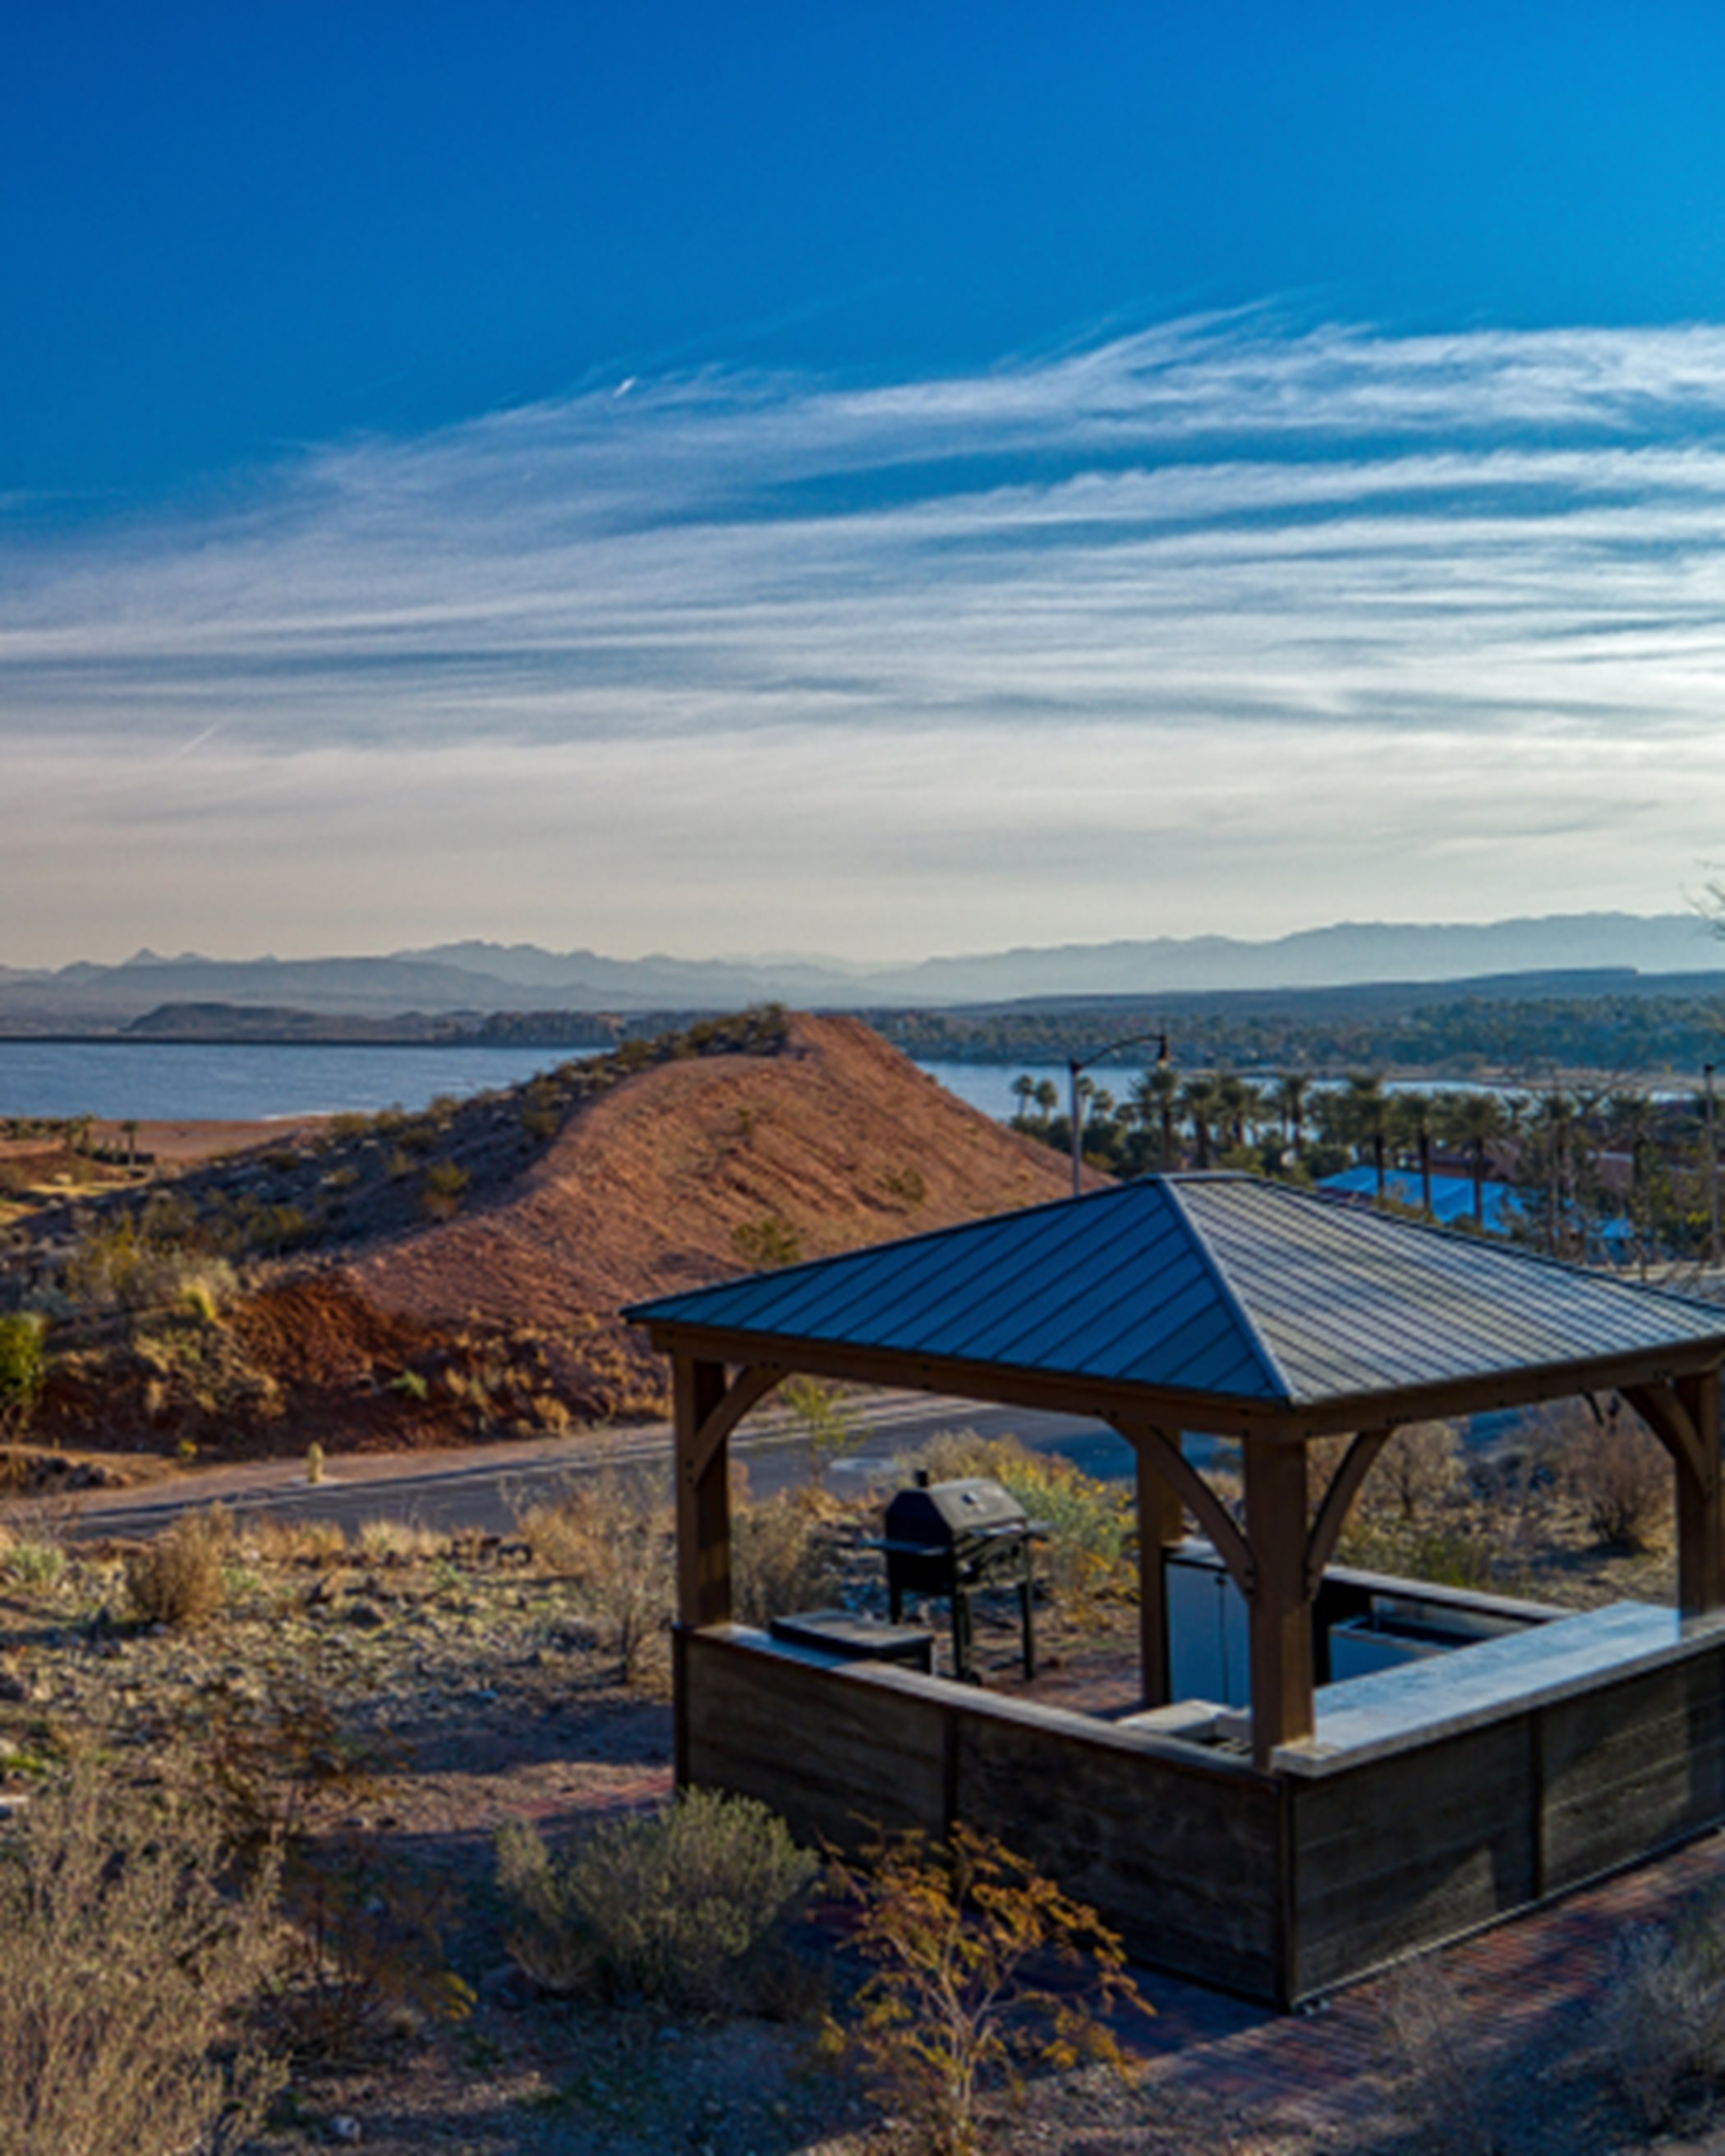 Lake Las Vegas picnic pavilion is the perfect place for a barbecue